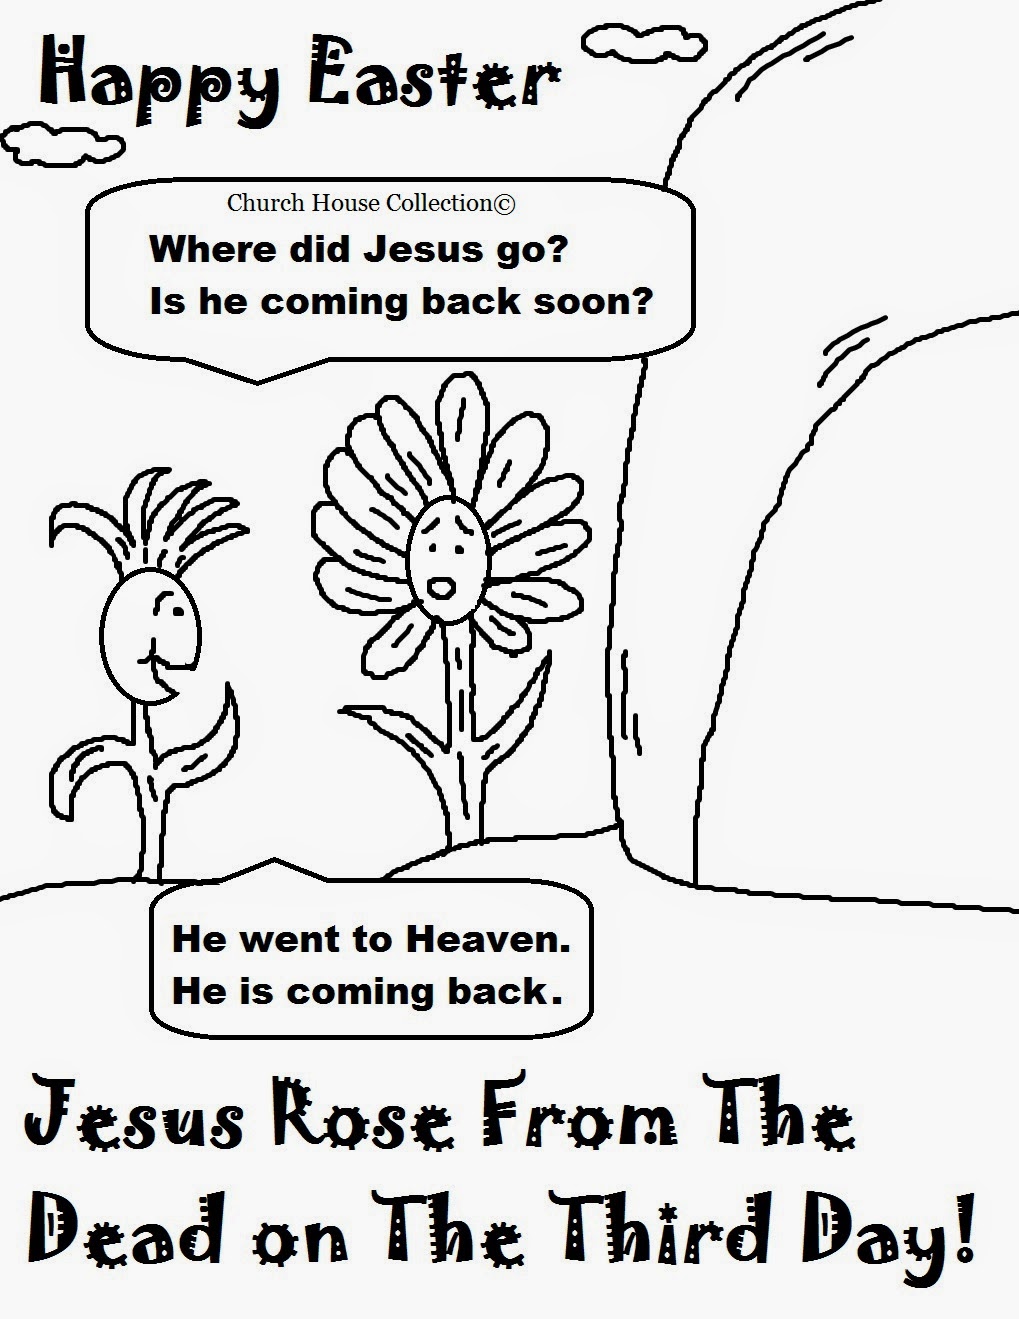 Church House Collection Blog: Easter Jesus Resurrection Coloring Pages